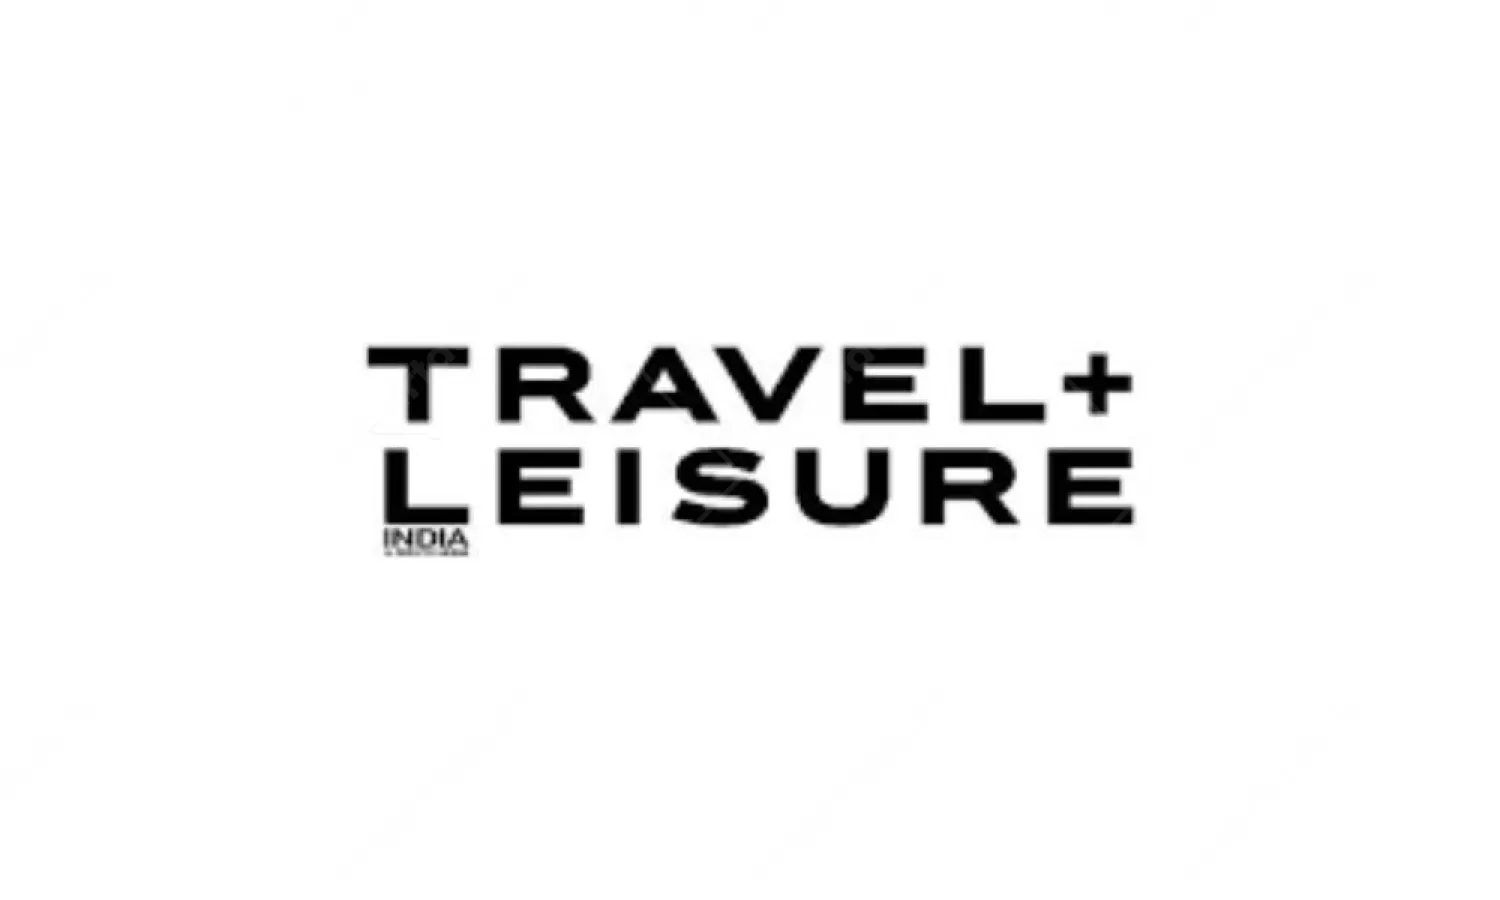 Digital Media Travel And Leisure Advertising in India